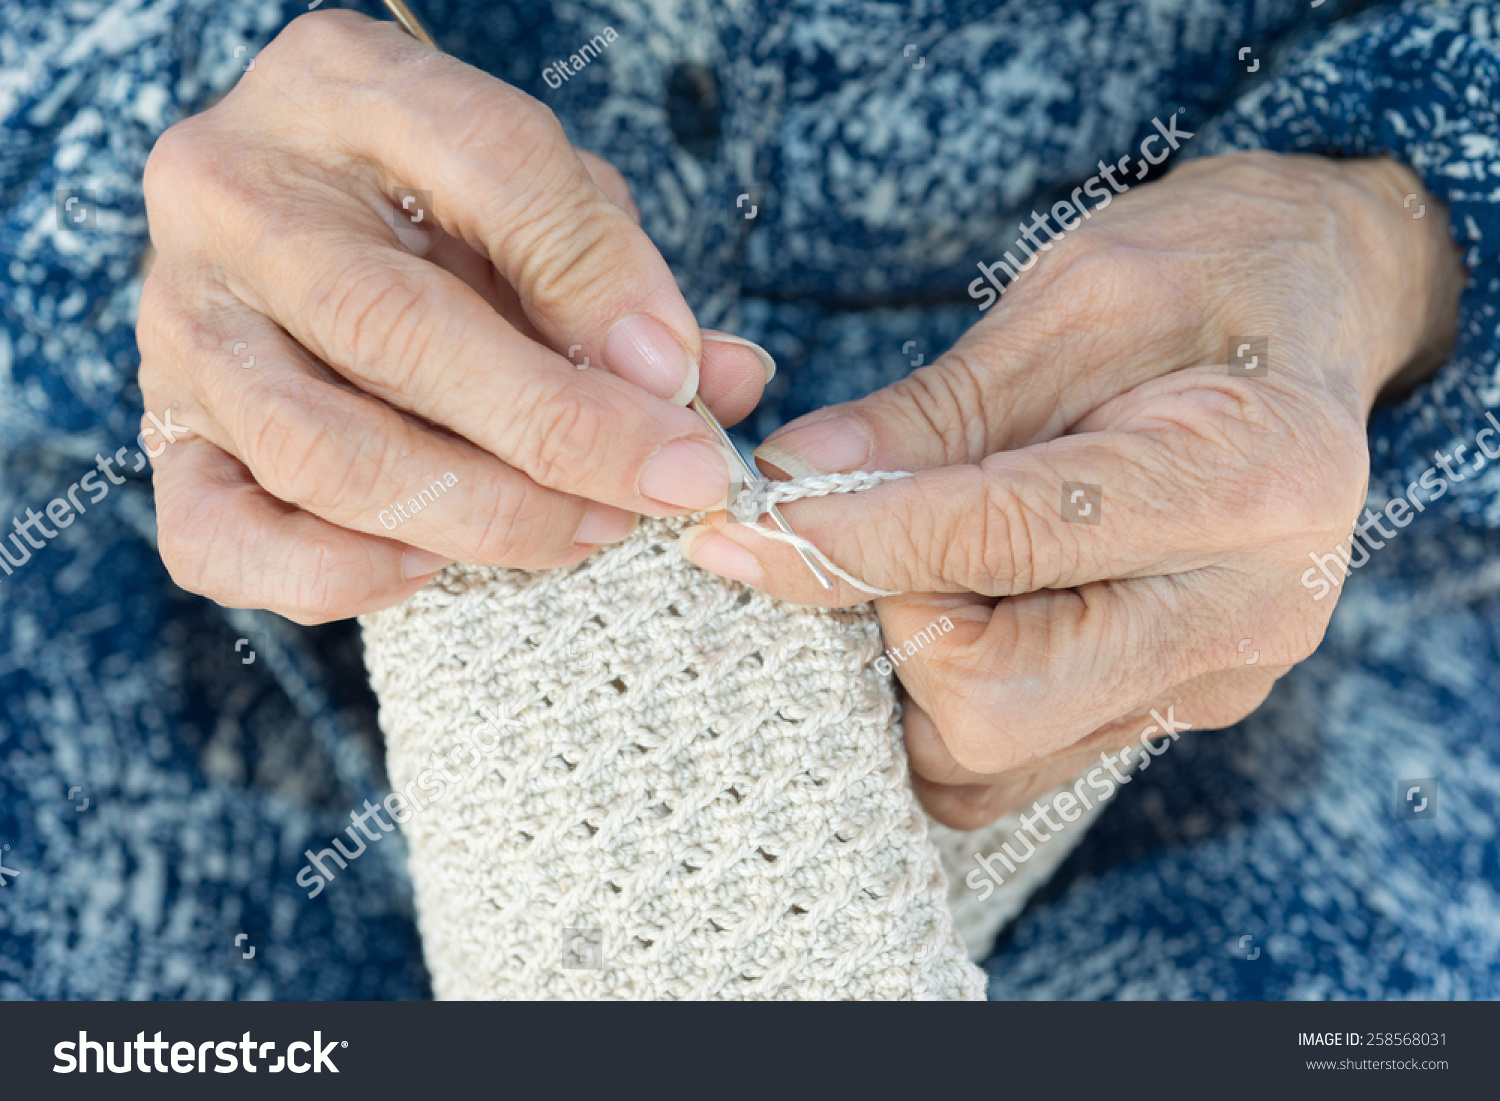 Detail of the hands of an elderly person crocheting #258568031